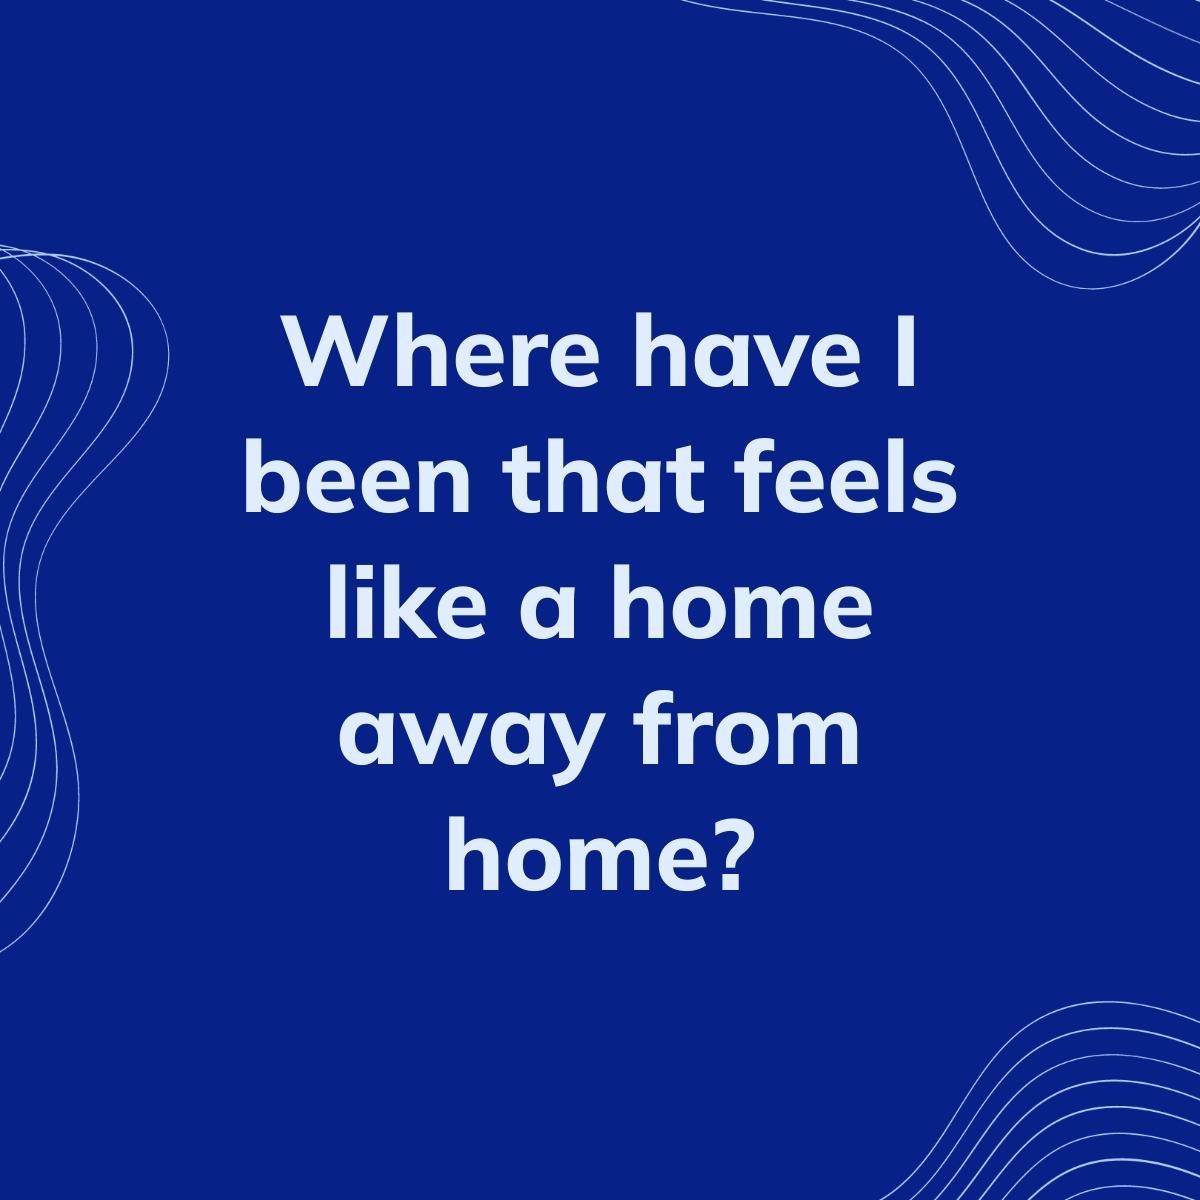 Journal Prompt: Where have I been that feels like a home away from home?